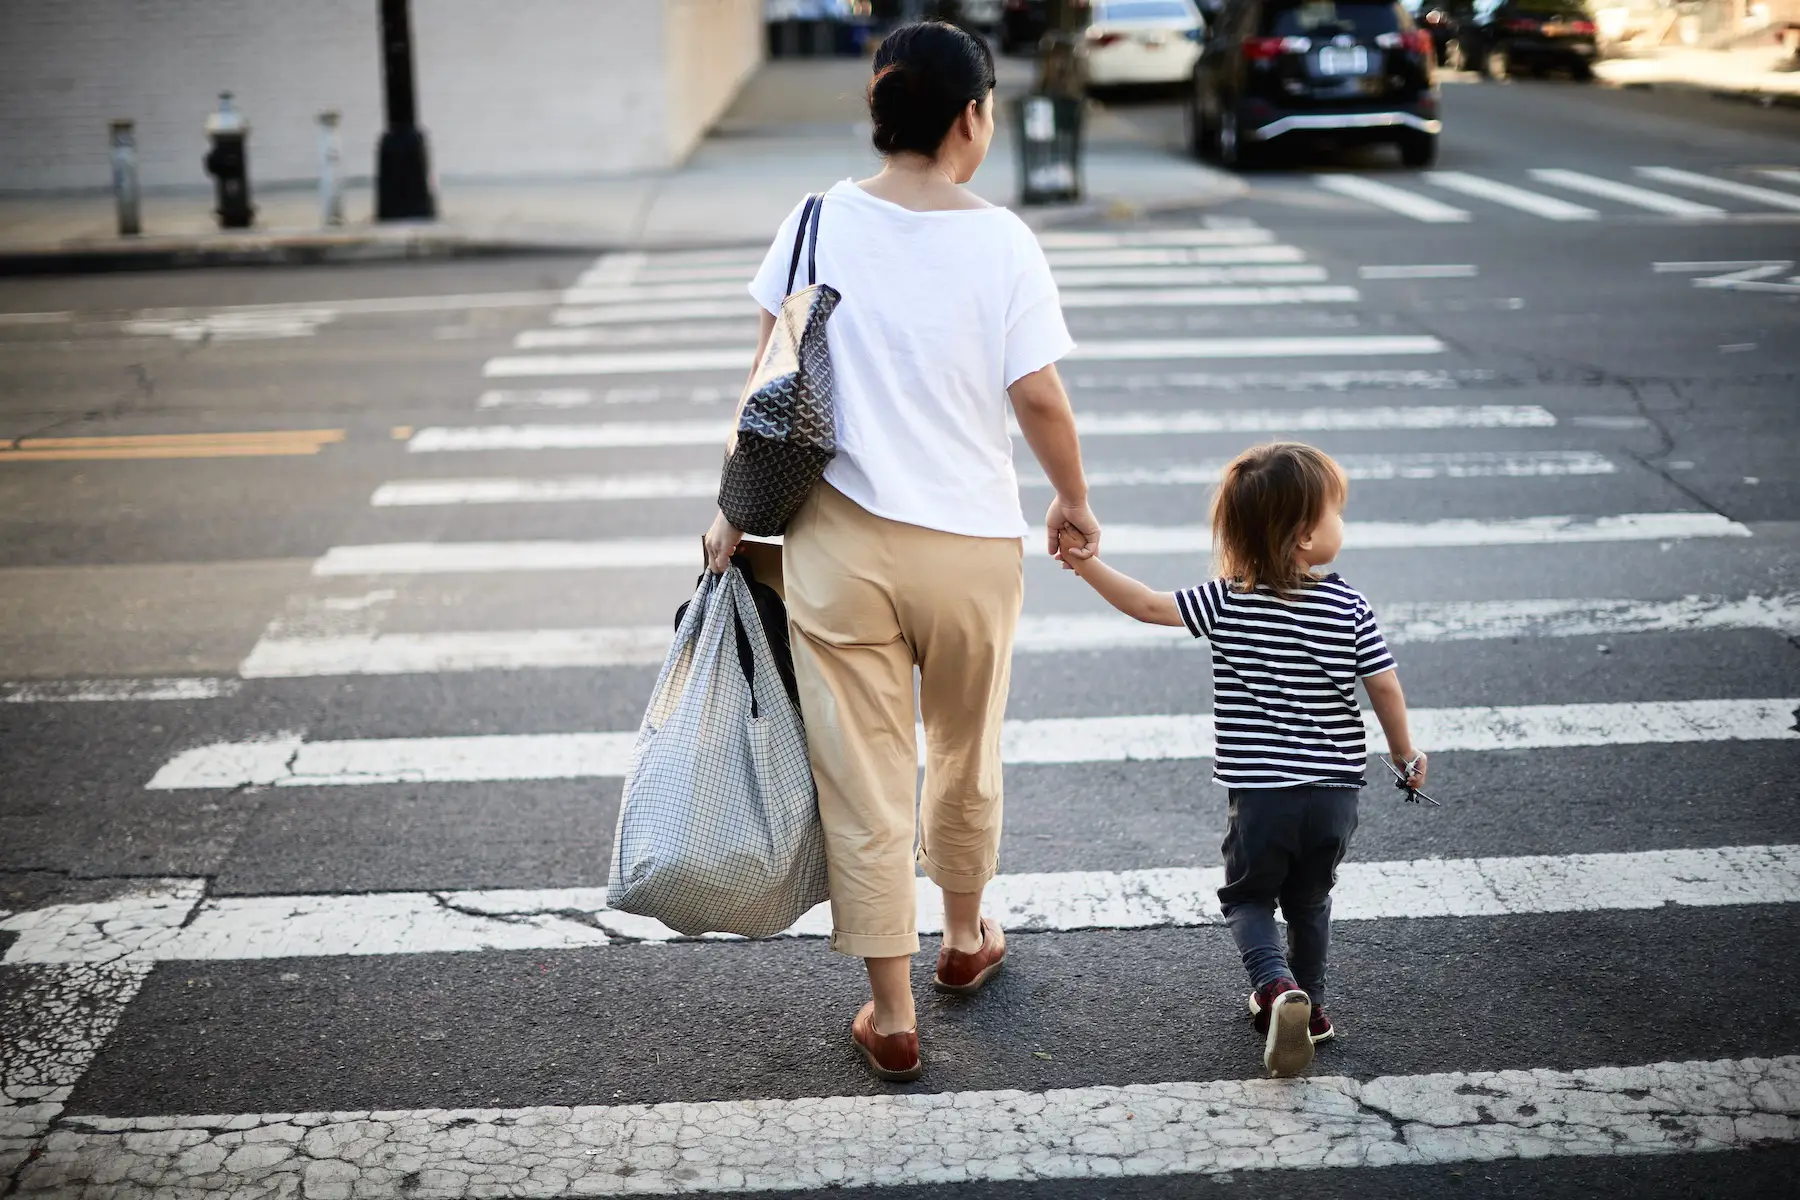 A mother carrying heavy bags while crossing the street with her young child in a busy city